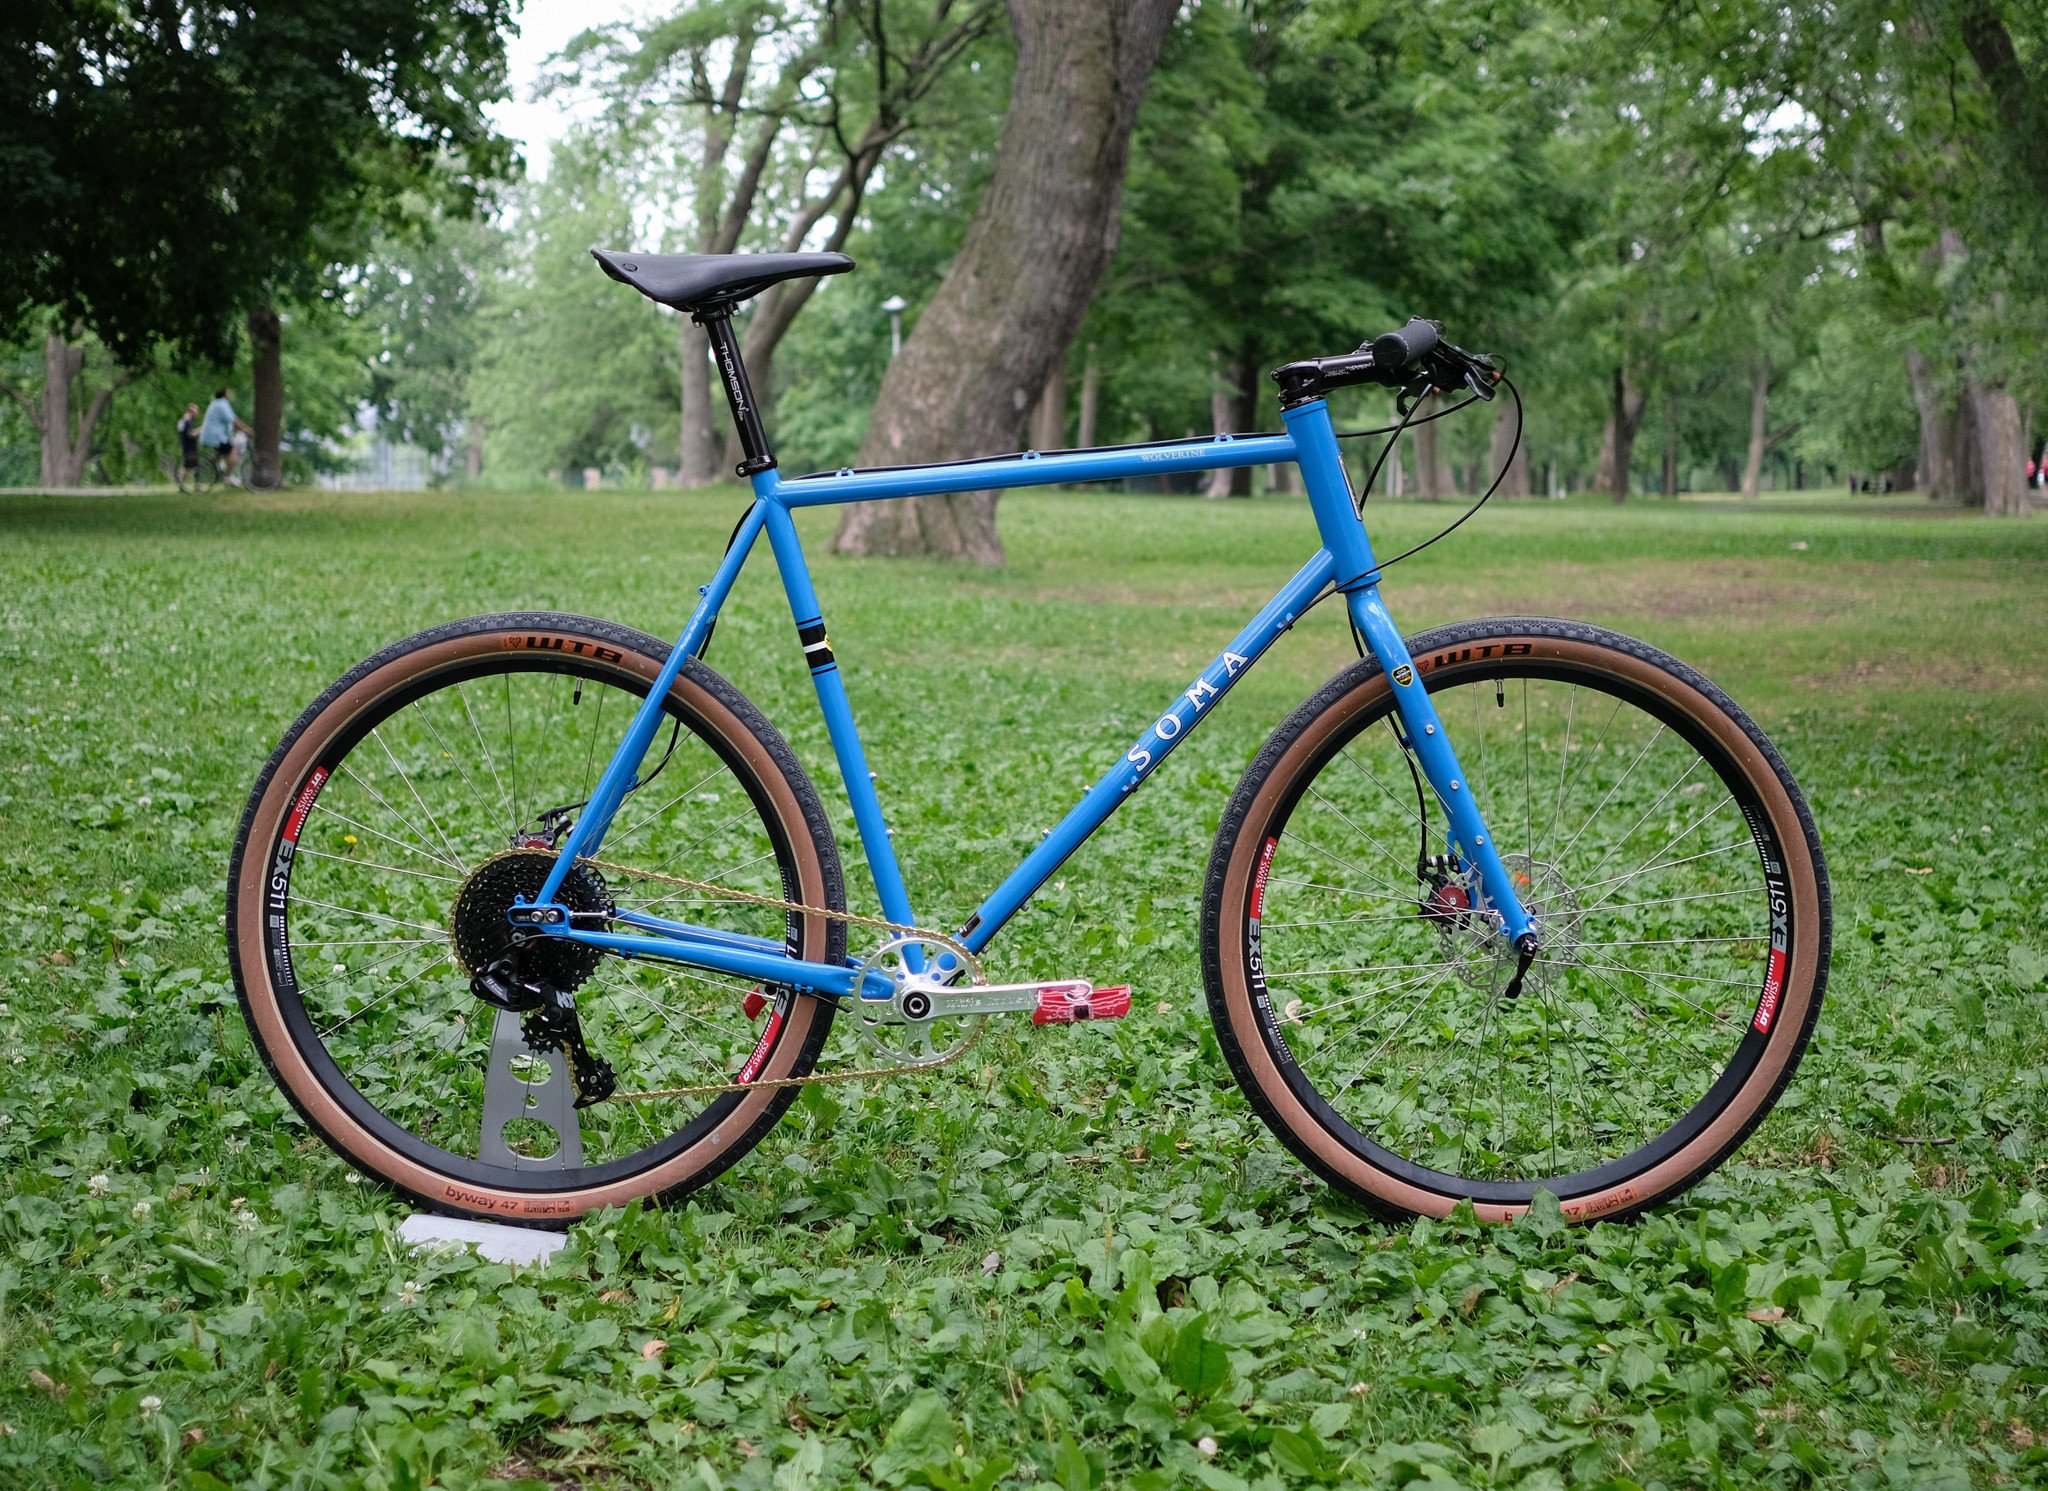 Latest Builds The archetypal Soma Wolverine C&L Cycles